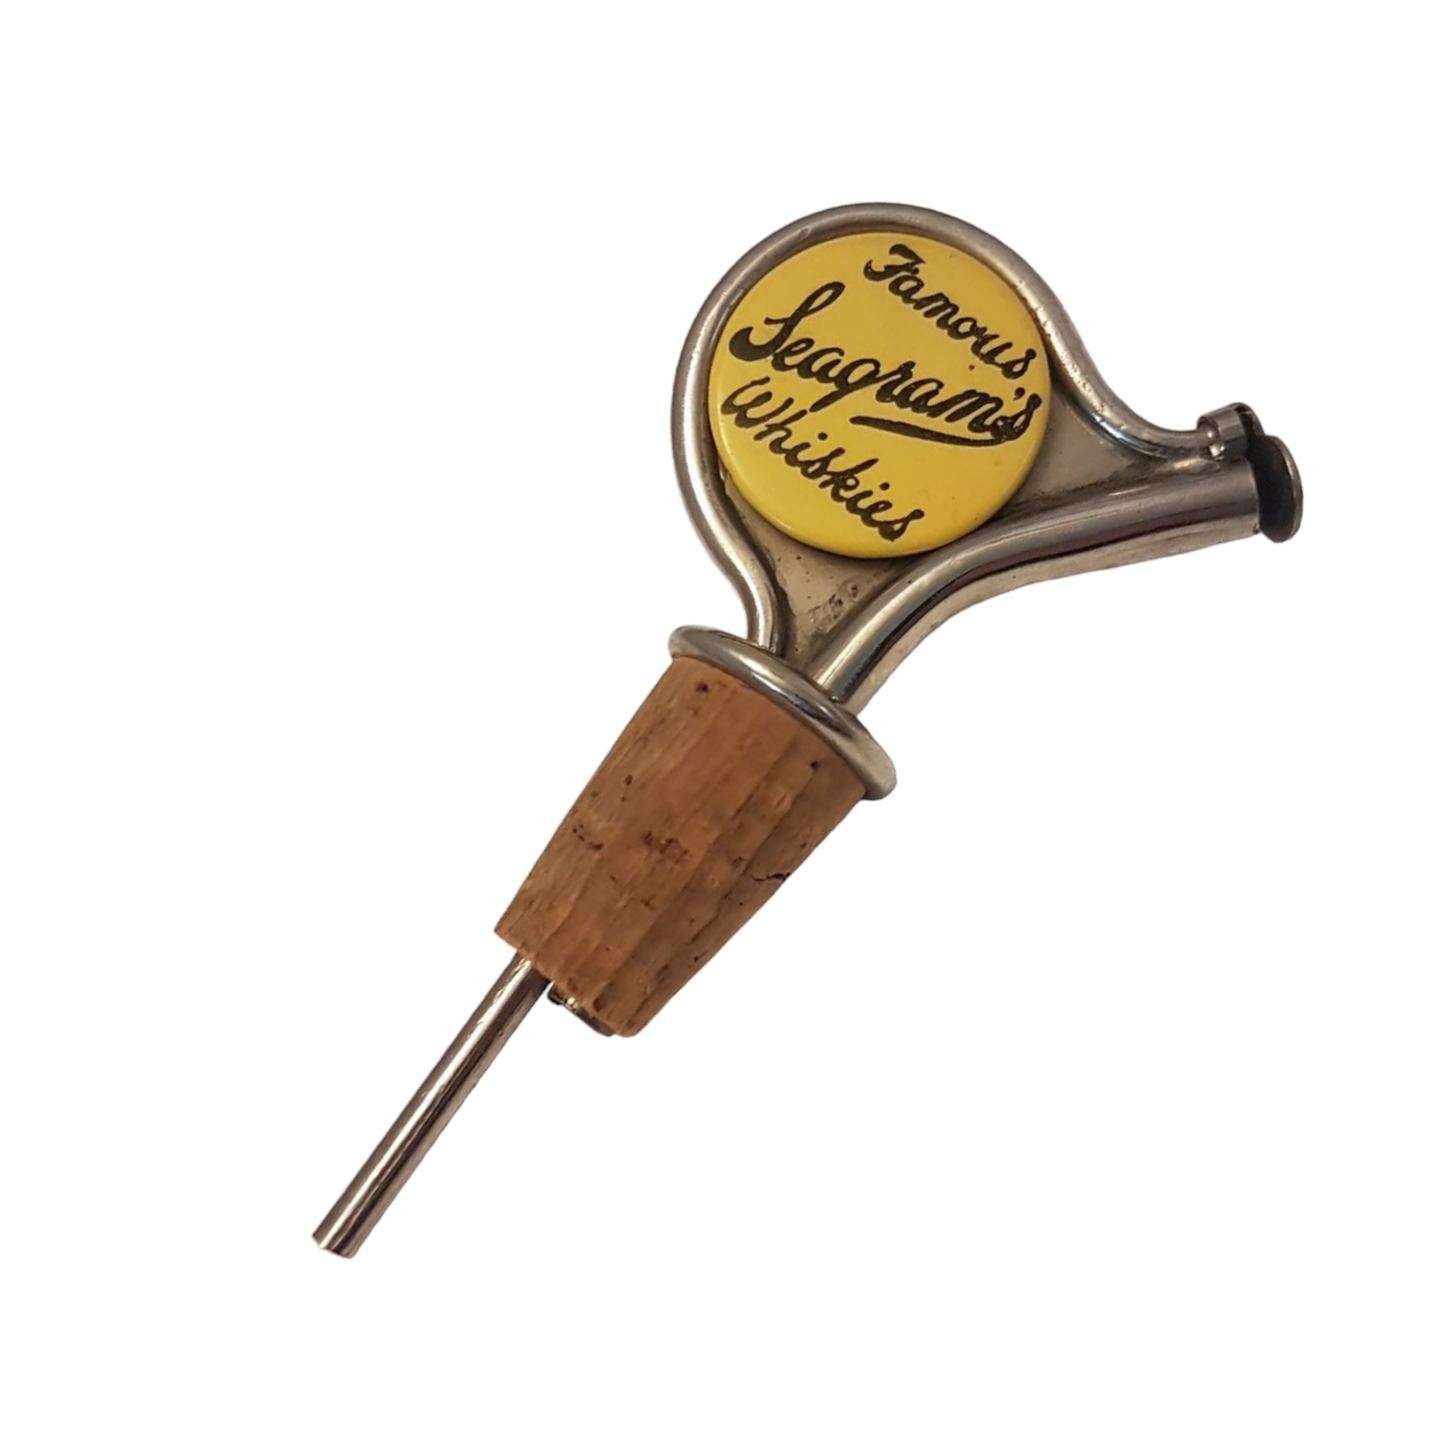 Famous Seagrams's Whiskies Bottle Stopper RARE FIND